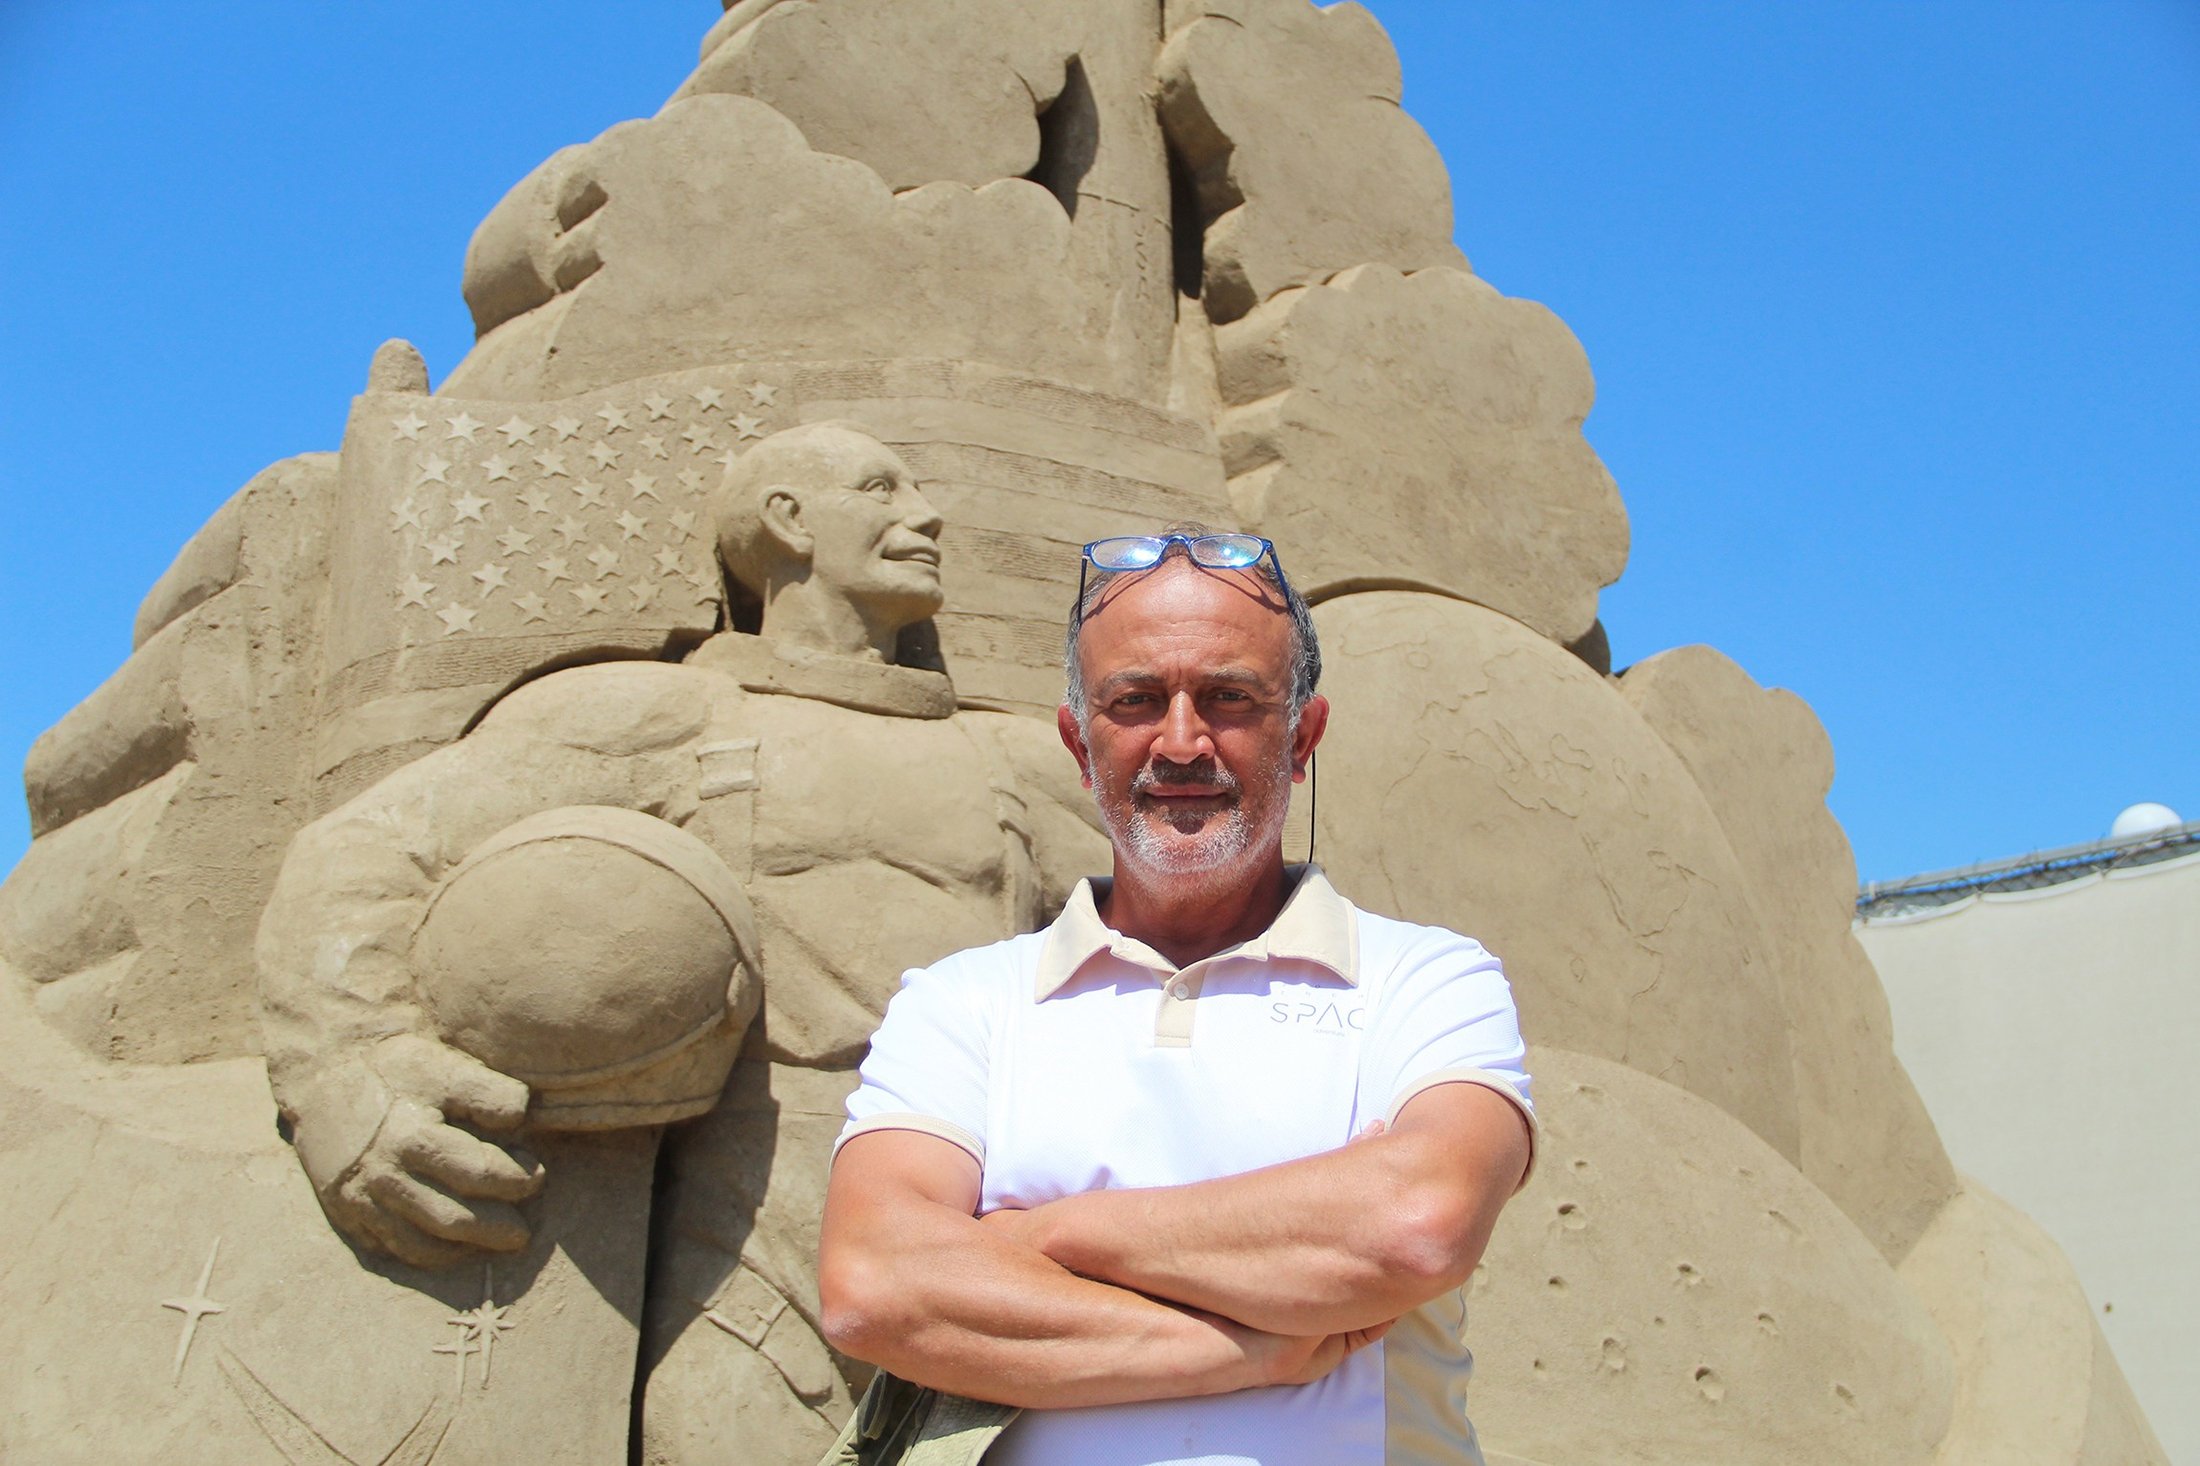 Sand art ground space themes in Antalya festival | Daily Sabah